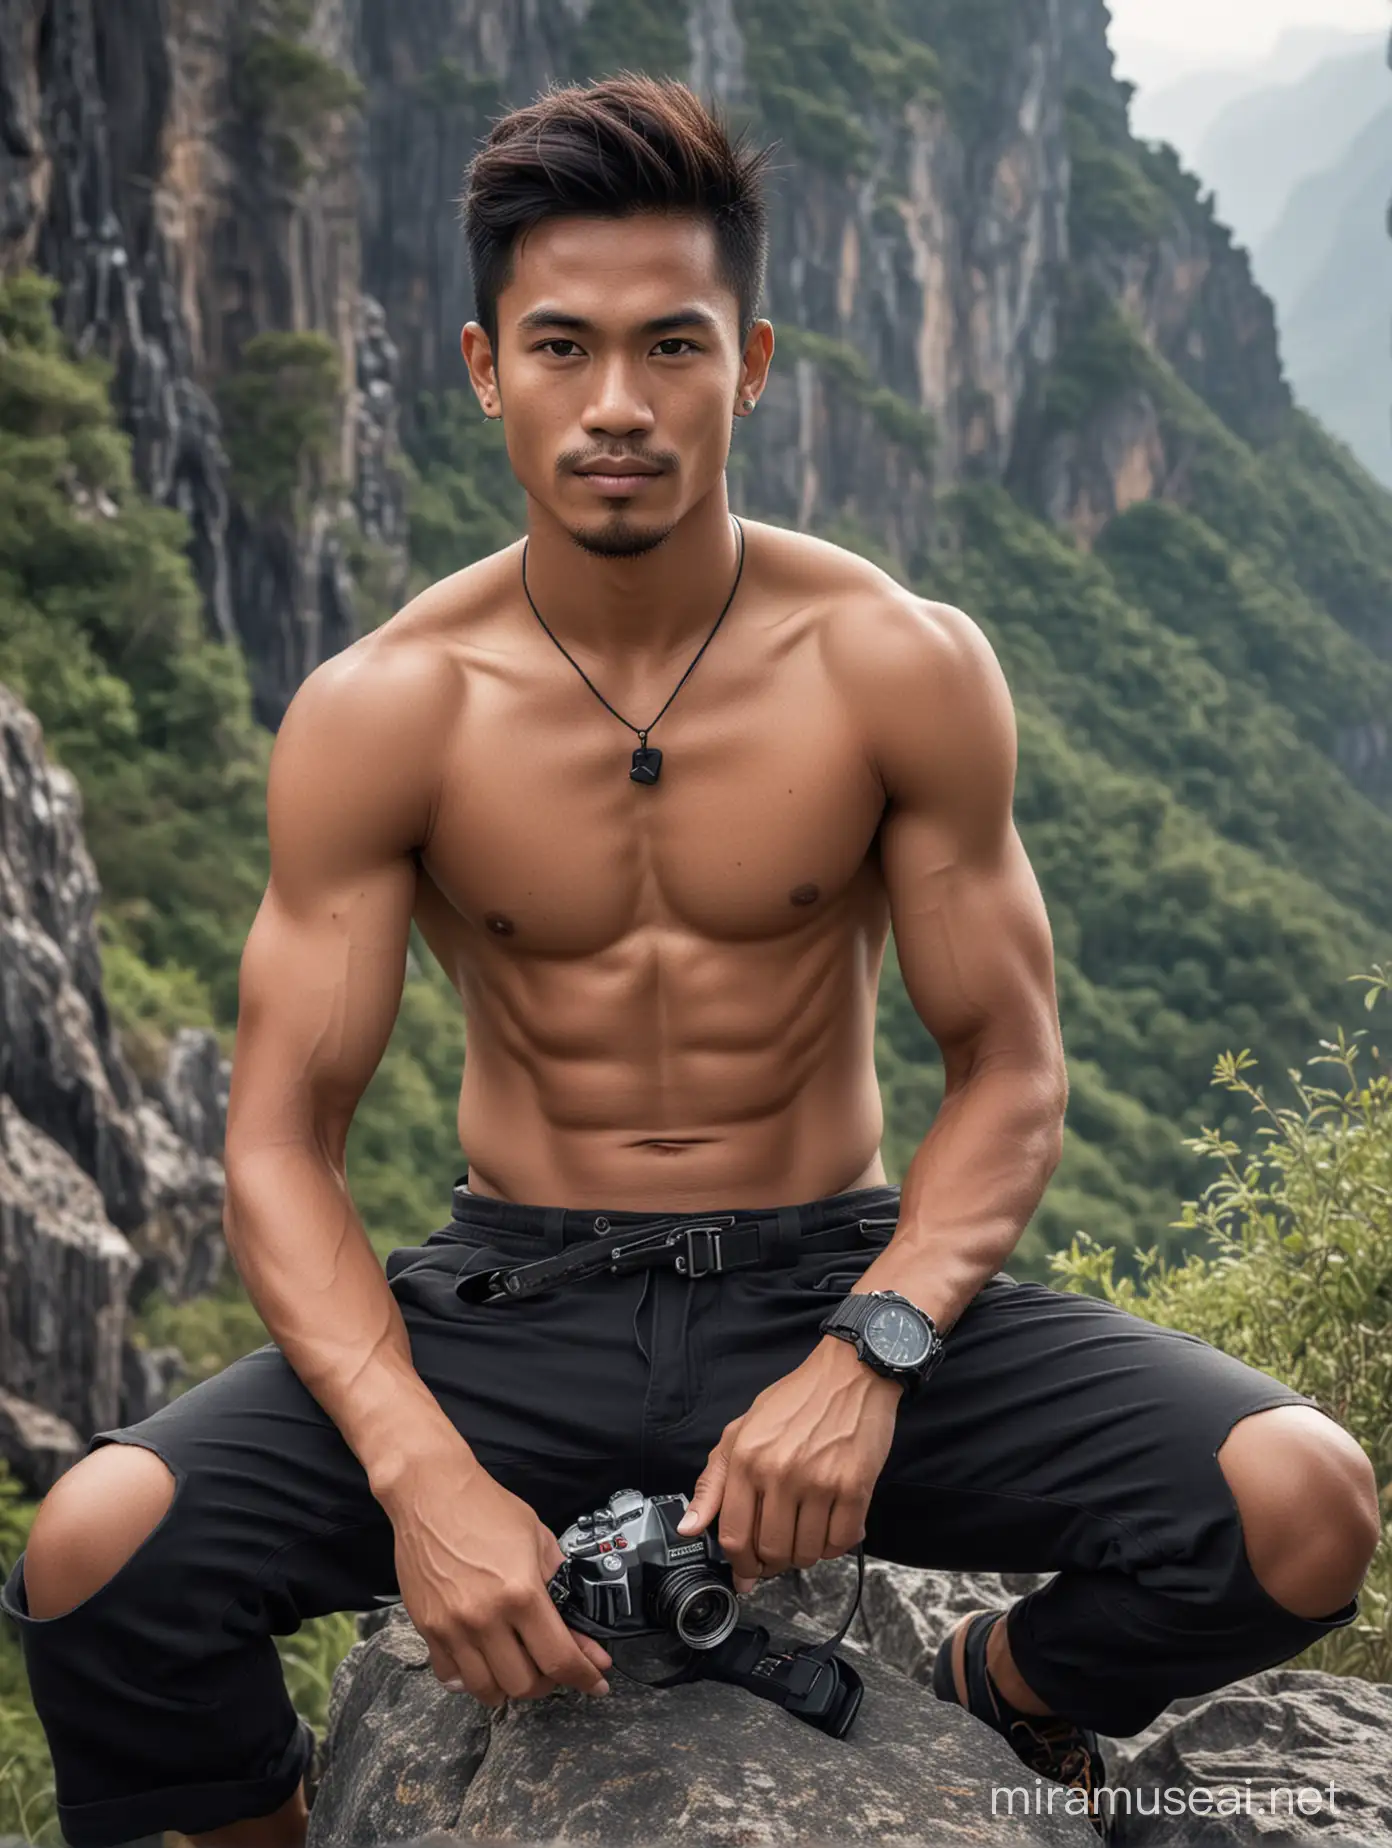 25 year old Indonesian man with abs and hairy body in adventure shirtless clothes, black trousers and watch and holding a camera, sitting on a cliff with a beautiful view, face facing forward, faint smile, realistic photo.